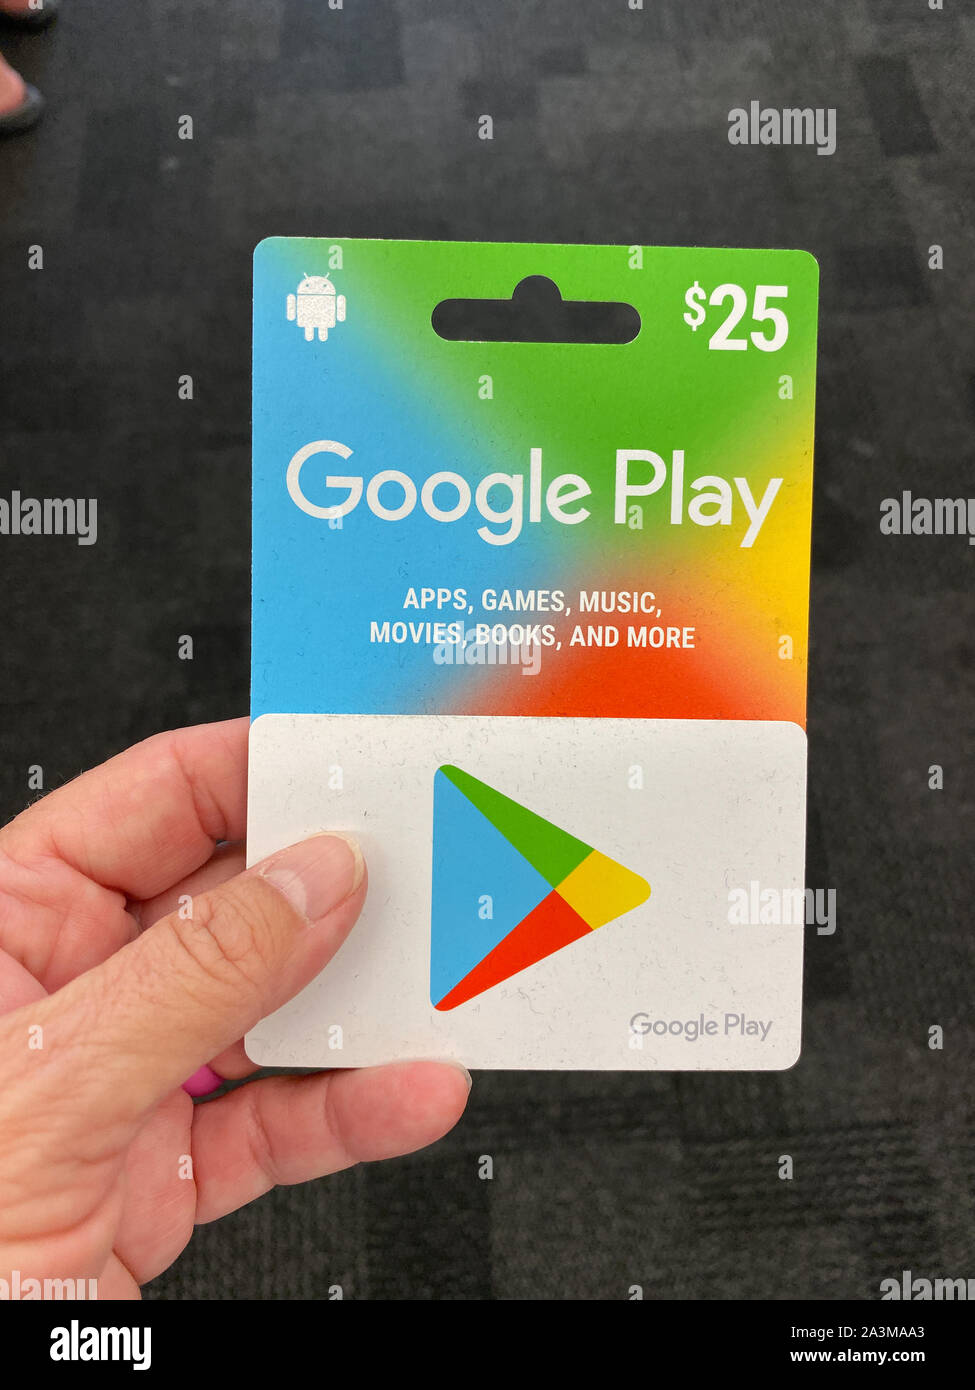 How Do I Get a Google Play Gift Card 